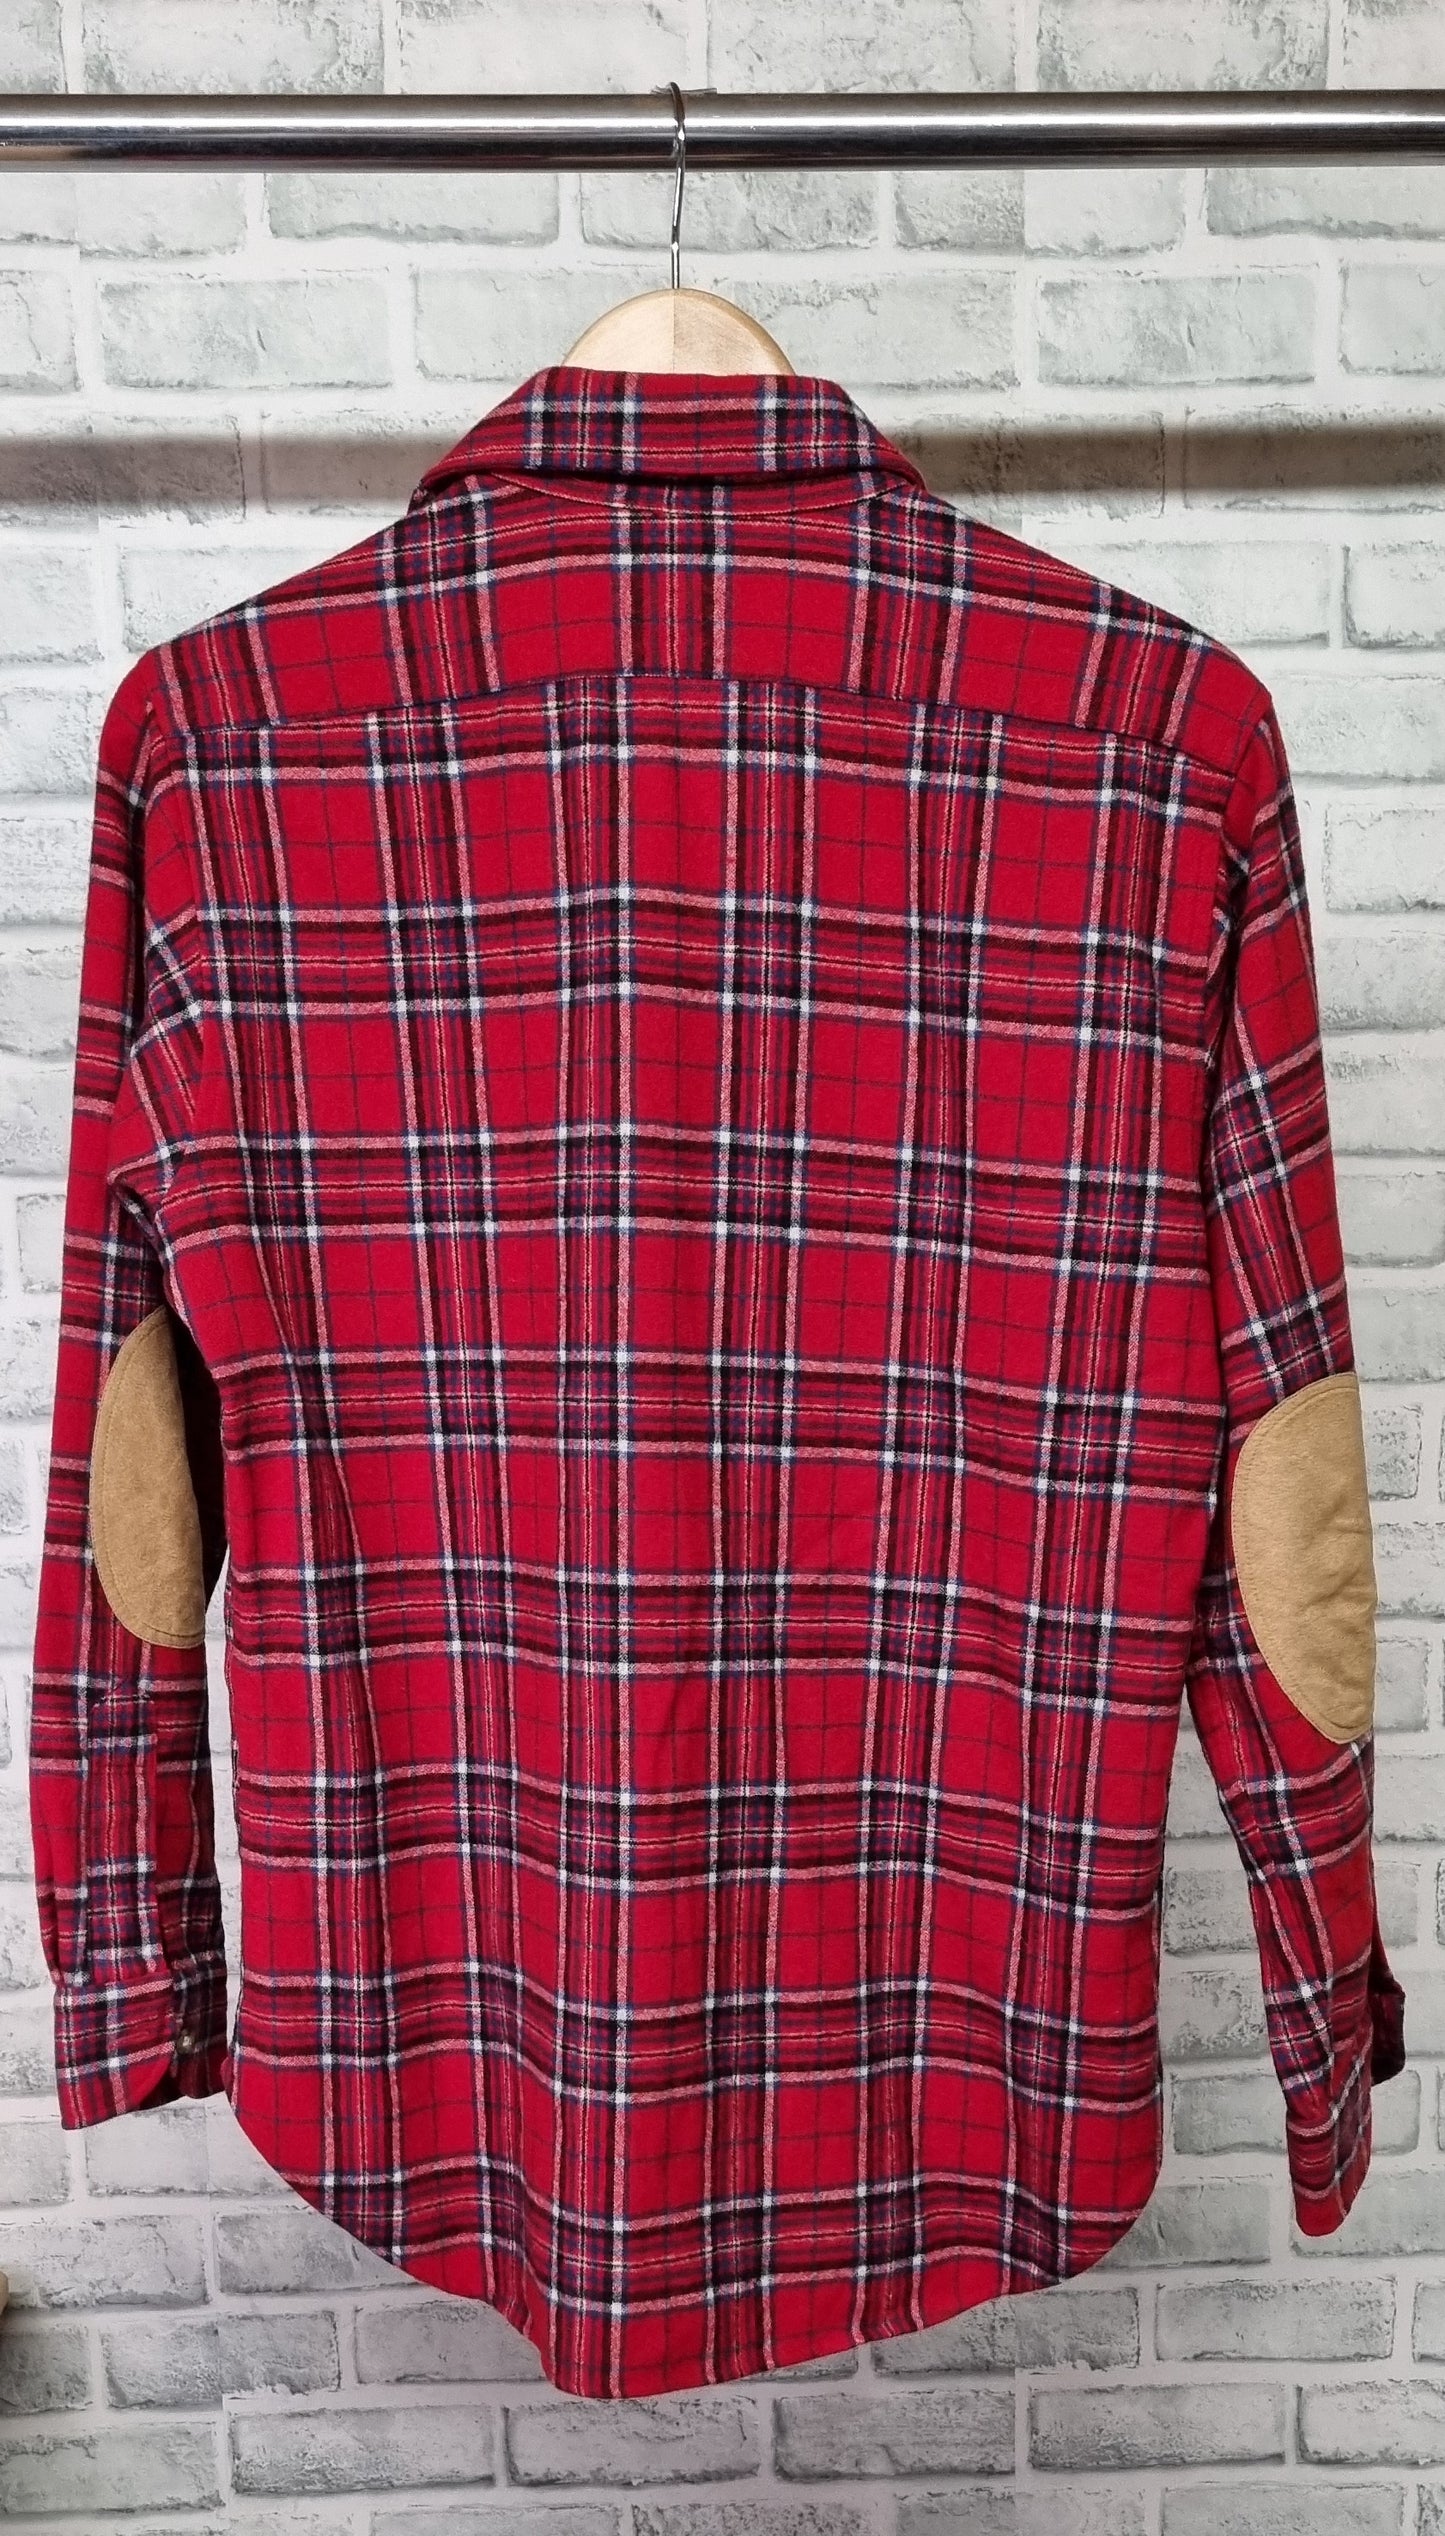 Vintage Lobo by Pendleton Red Wool Flannel Shirt with Elbow Patches Size Medium